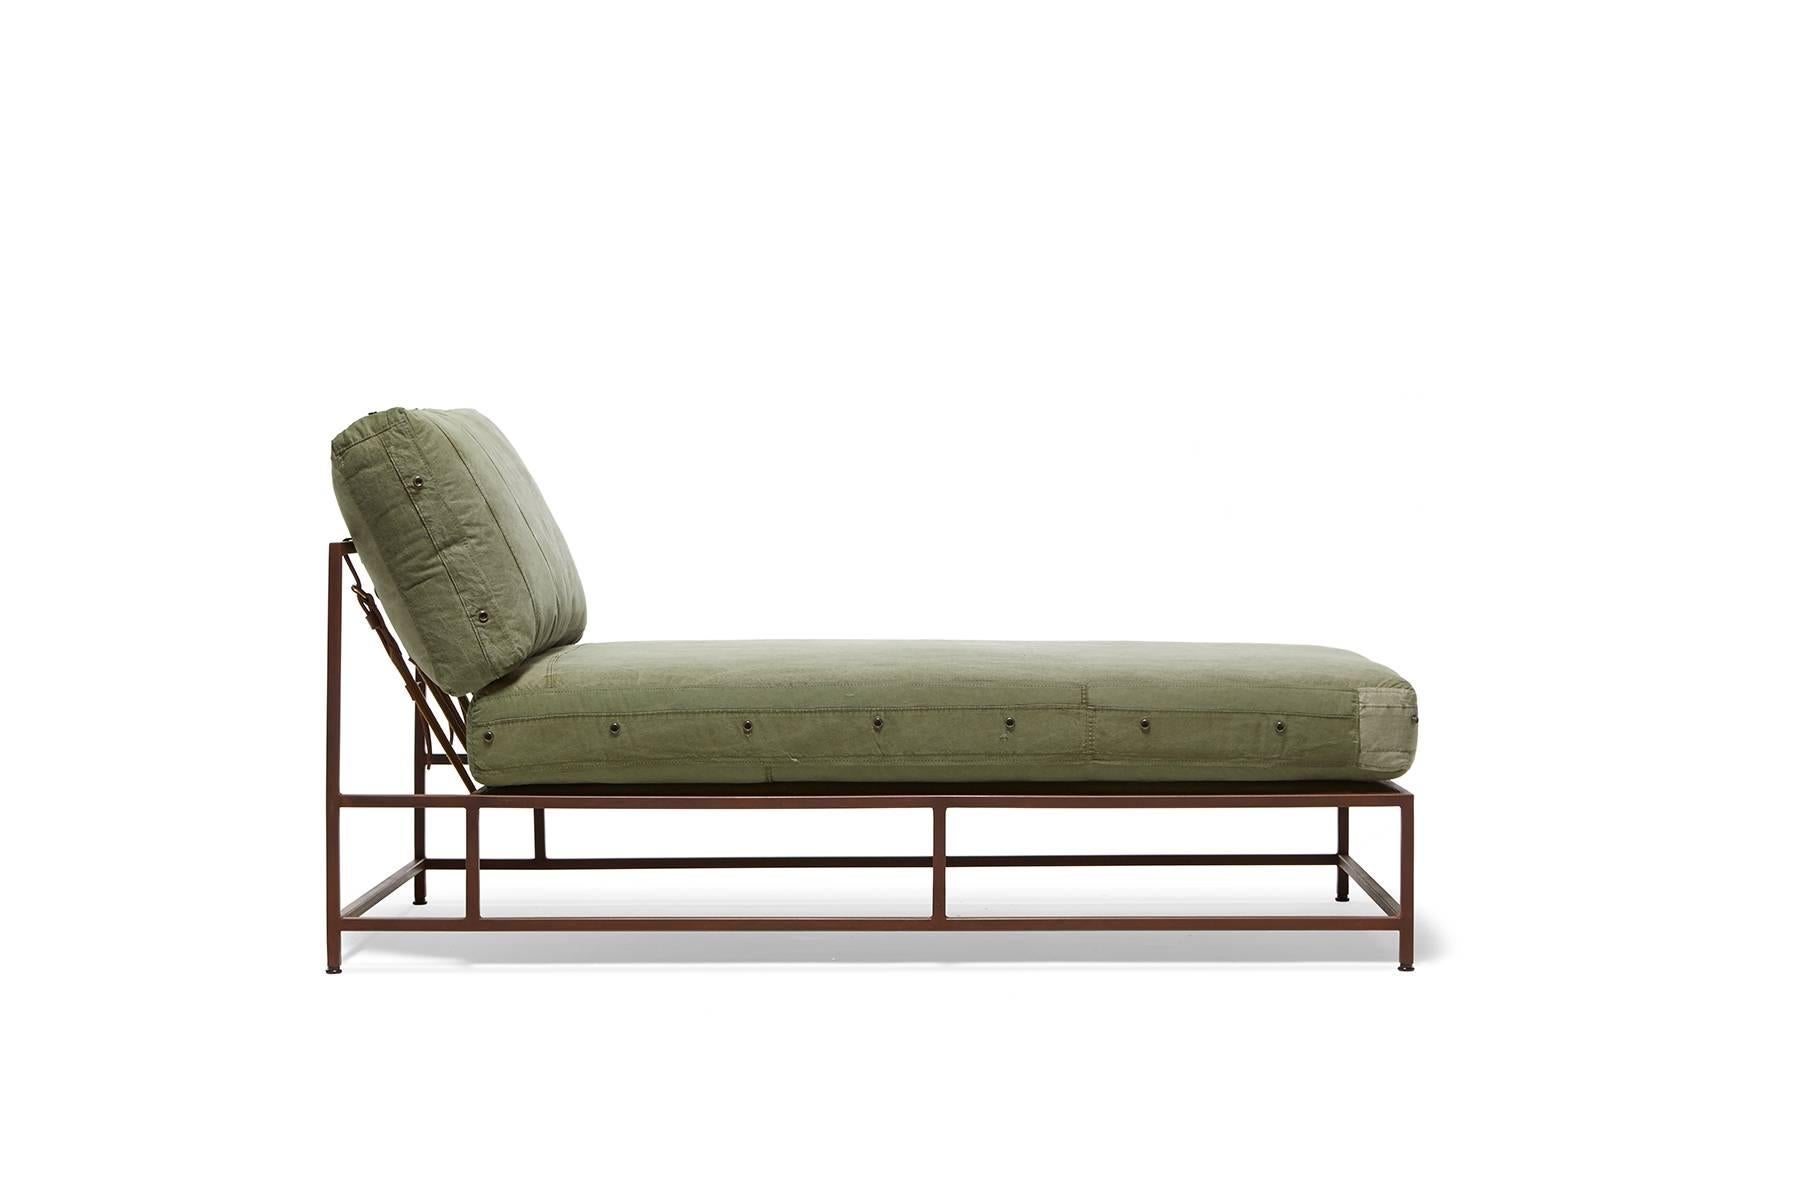 rust chaise lounge